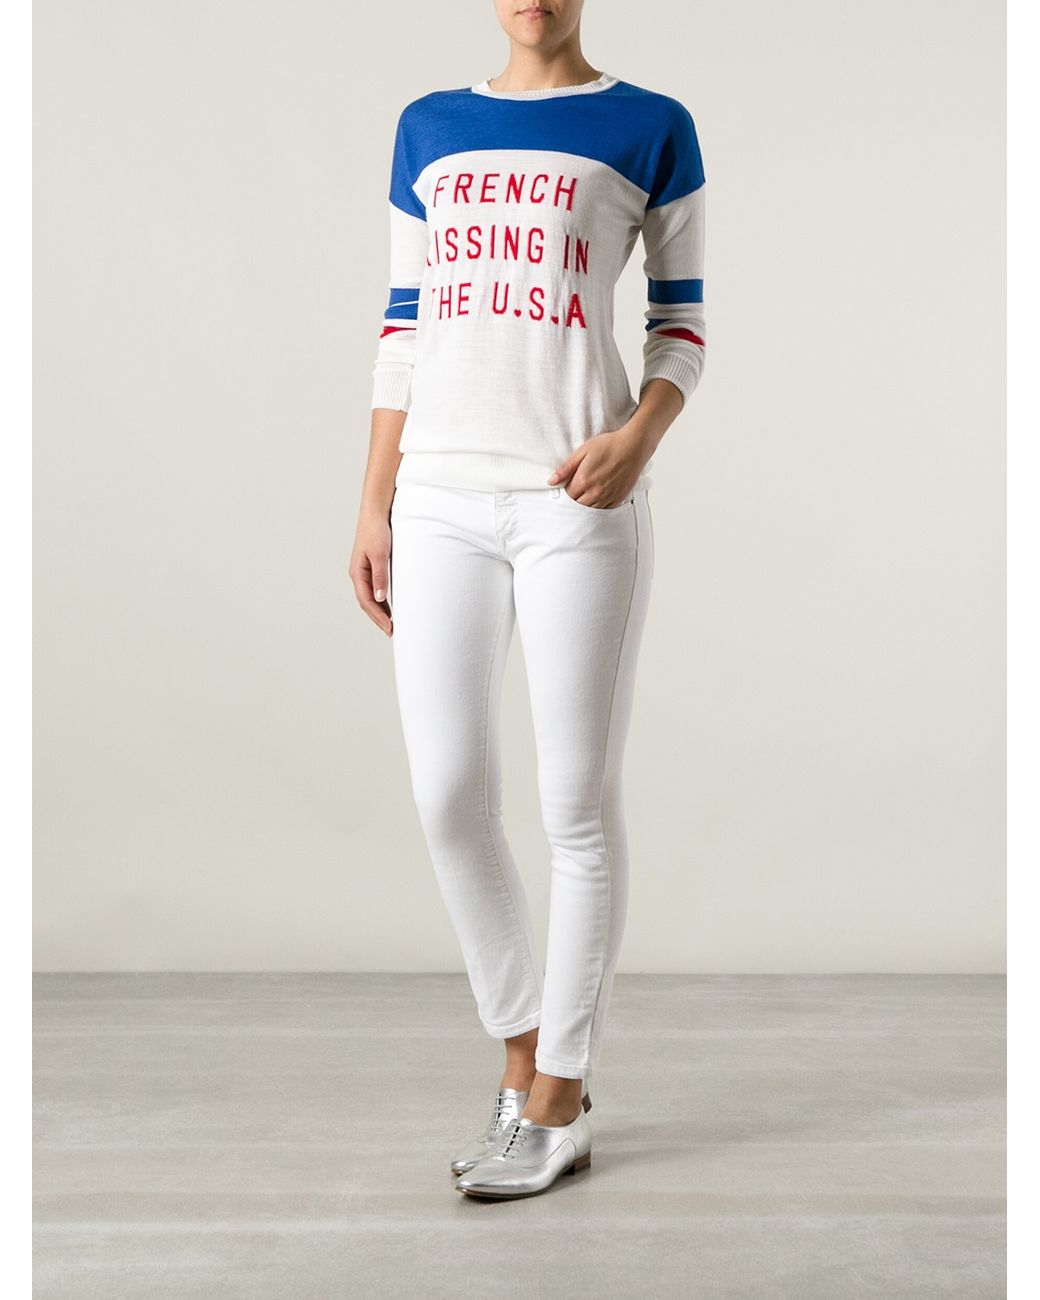 Zoe Karssen French Kissing in The Usa Sweater in White | Lyst